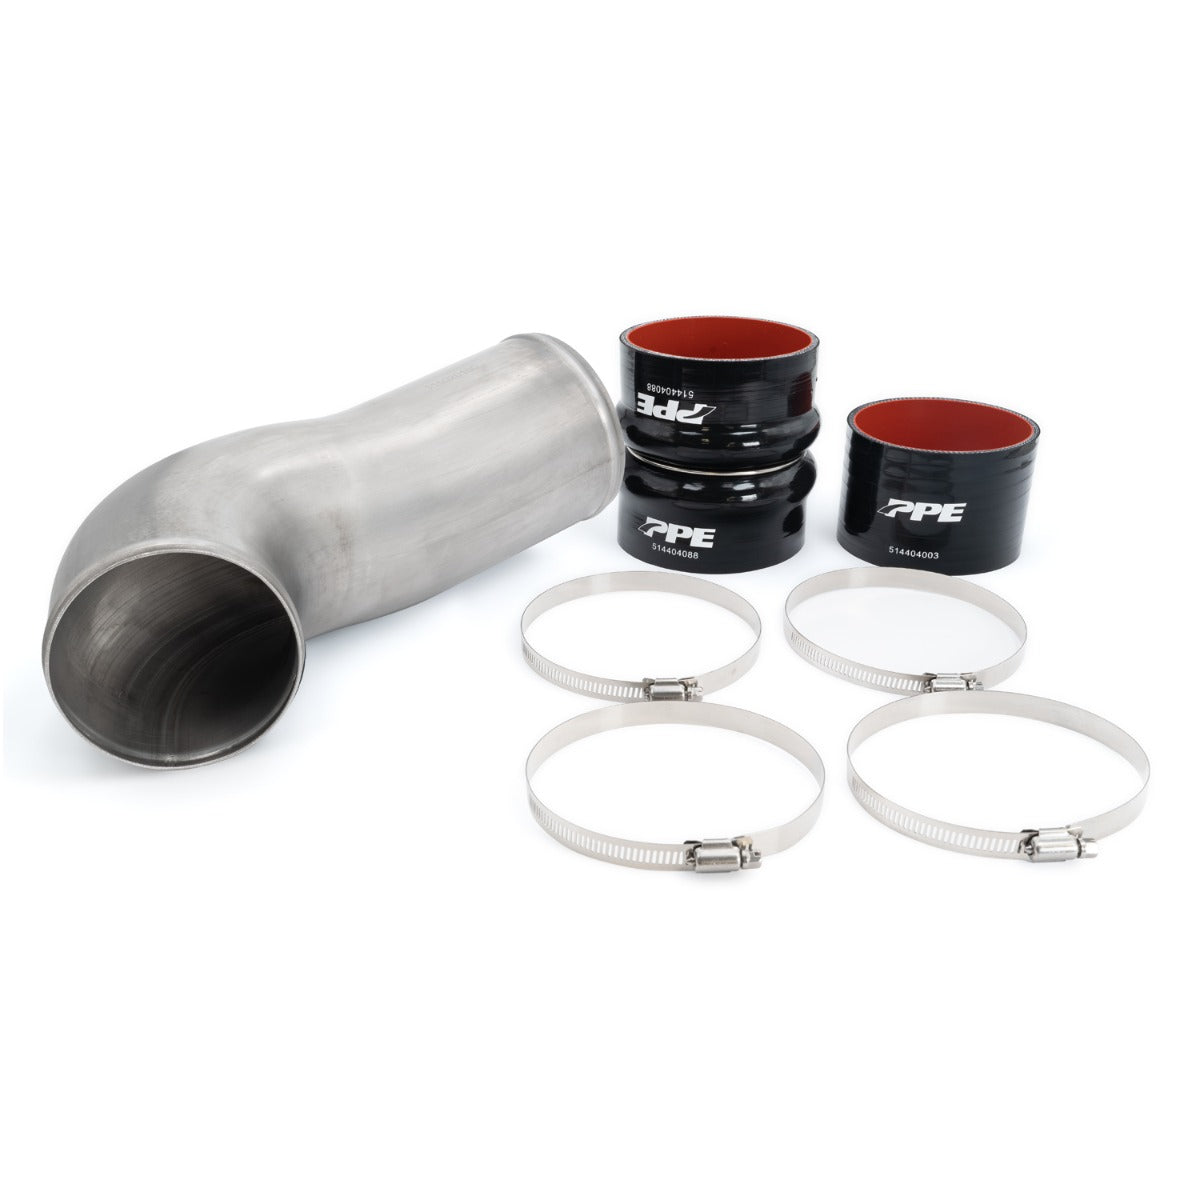 2020-2024 GM 6.6L Duramax Turbo Inlet Upgrade Kit ppepower